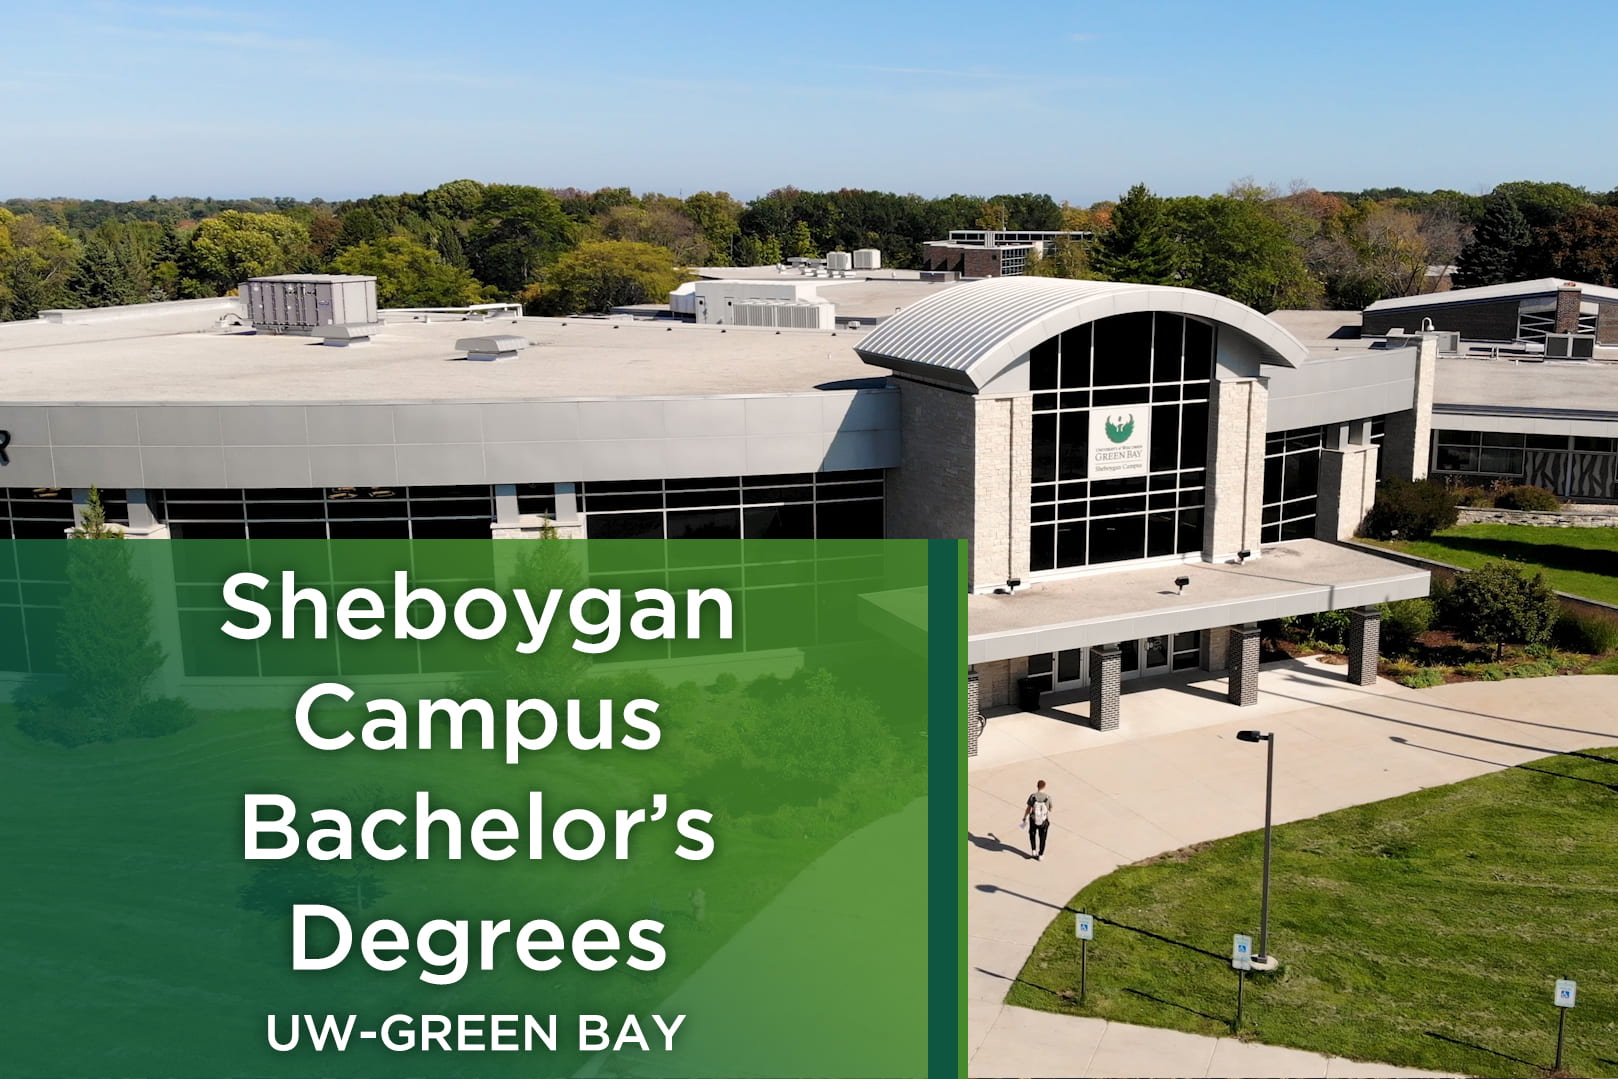 Ariel photo of a student wearing a backpack walking towards the front entrance of the UW-Green Bay Sheboygan Campus.